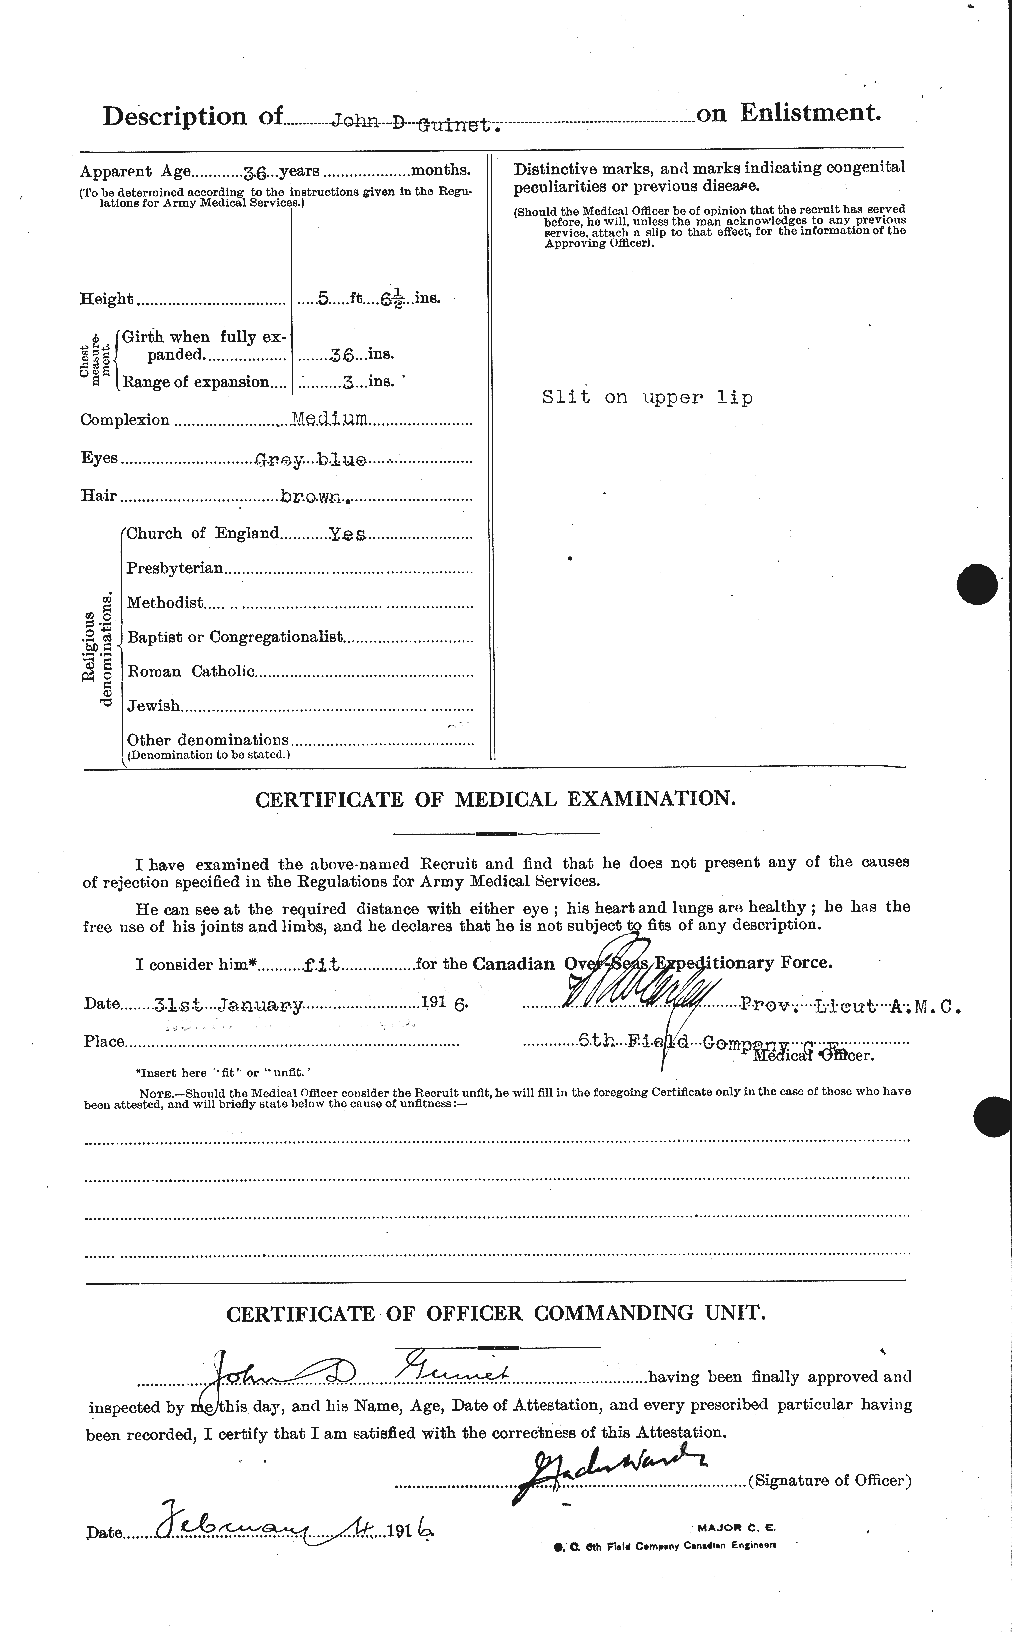 Personnel Records of the First World War - CEF 367798b